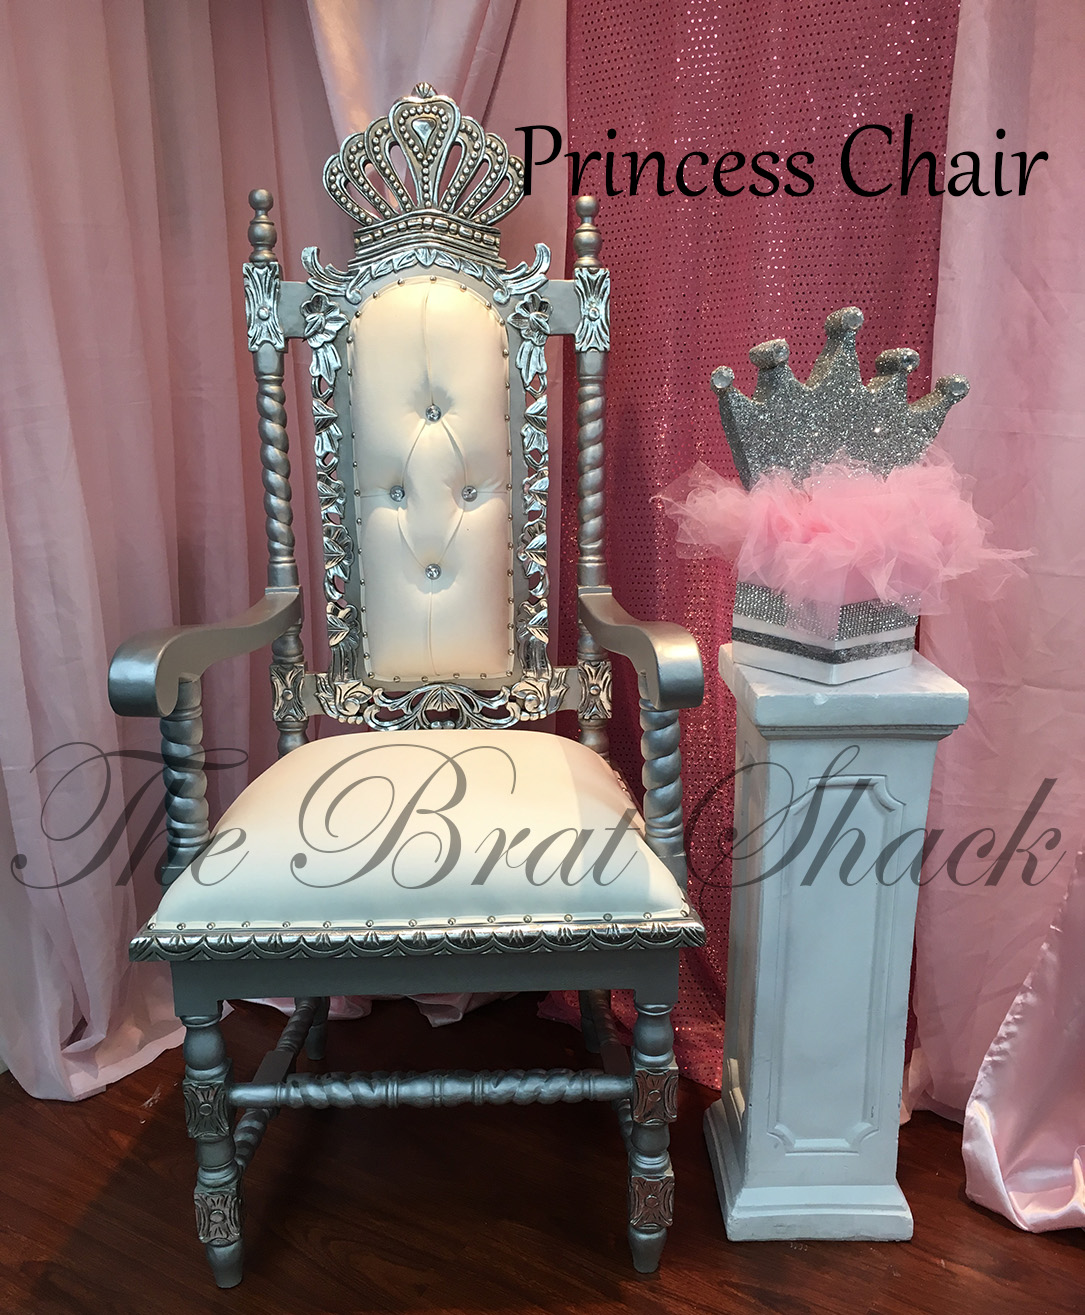 Elegant Princess Chair Rental For Birthdays Baby Showers The Brat Shack Party Store